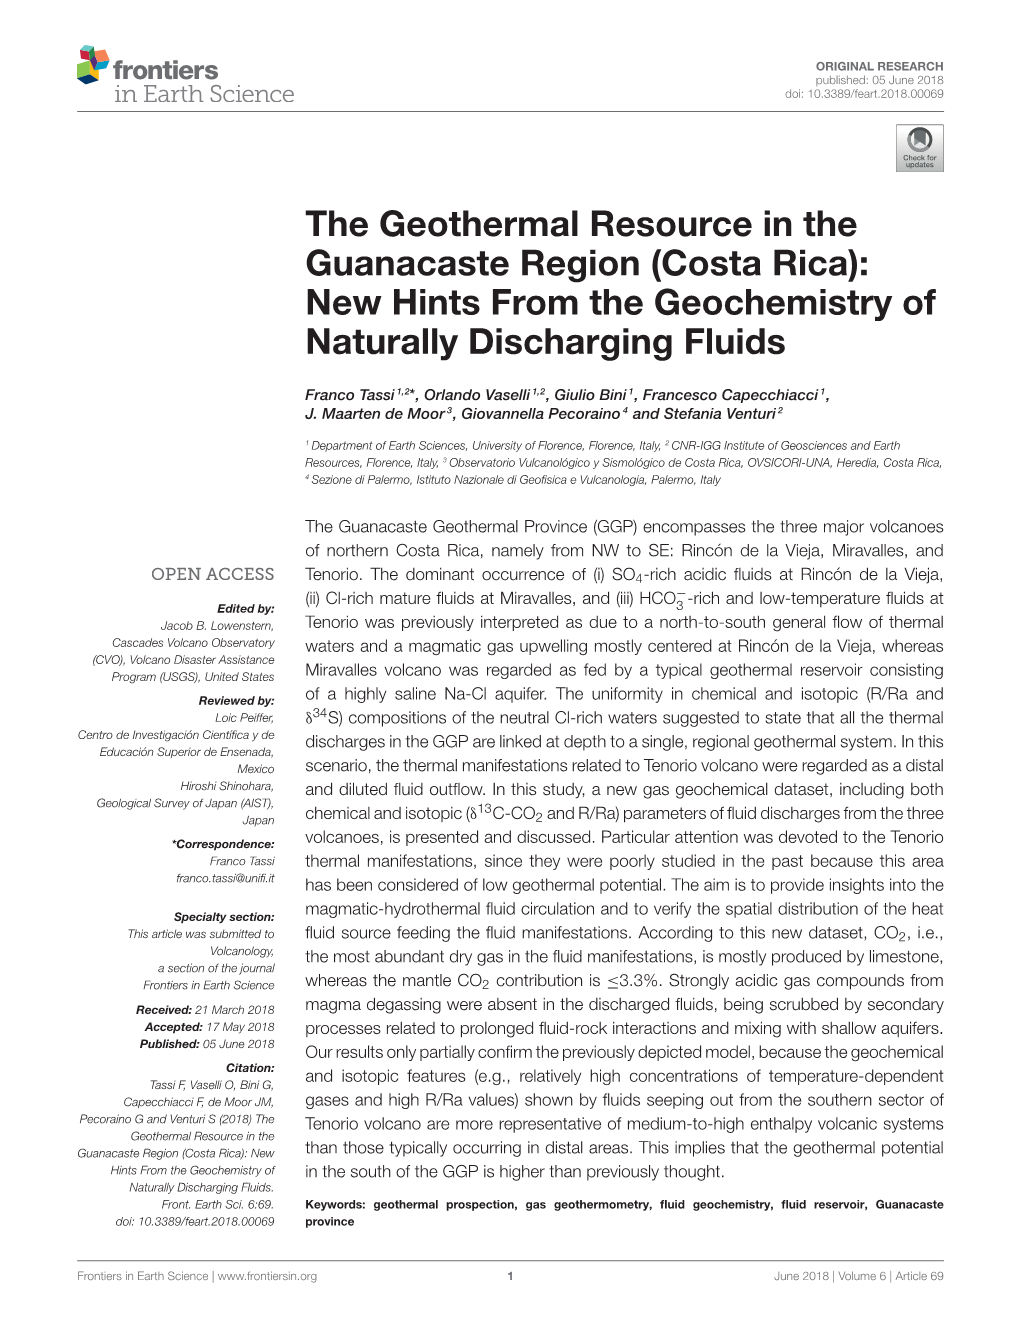 The Geothermal Resource in the Guanacaste Region (Costa Rica): New Hints from the Geochemistry of Naturally Discharging Fluids